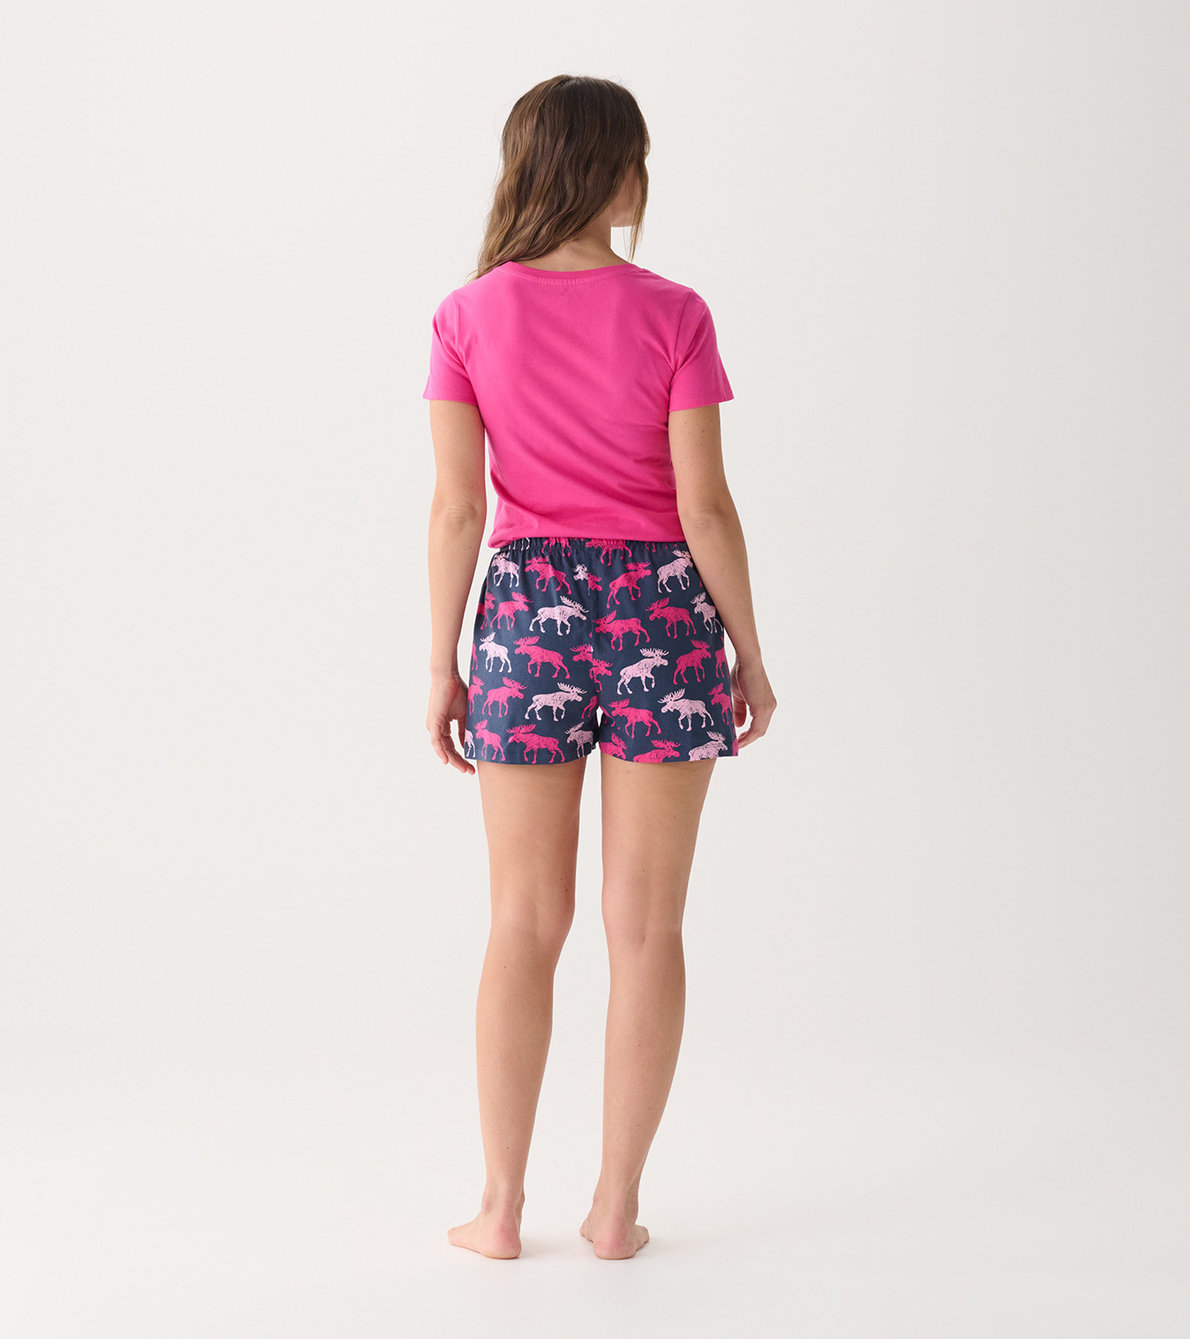 View larger image of Women's Raspberry Moose T-Shirt and Shorts Pajama Separates